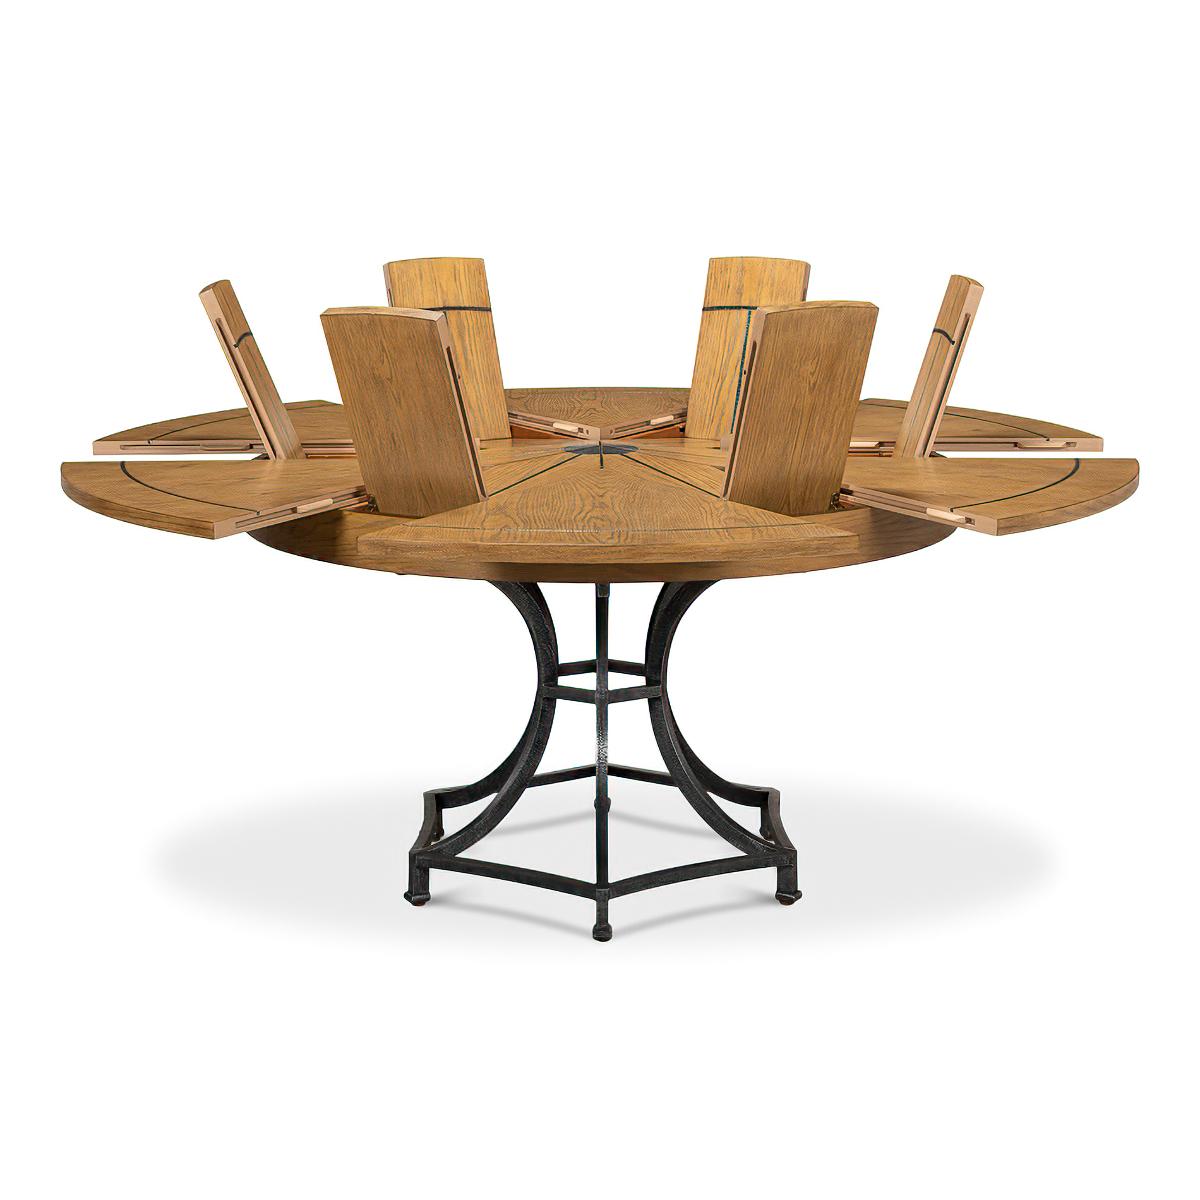 Modern Industrial Round Dining Table - Warm Oak In New Condition For Sale In Westwood, NJ